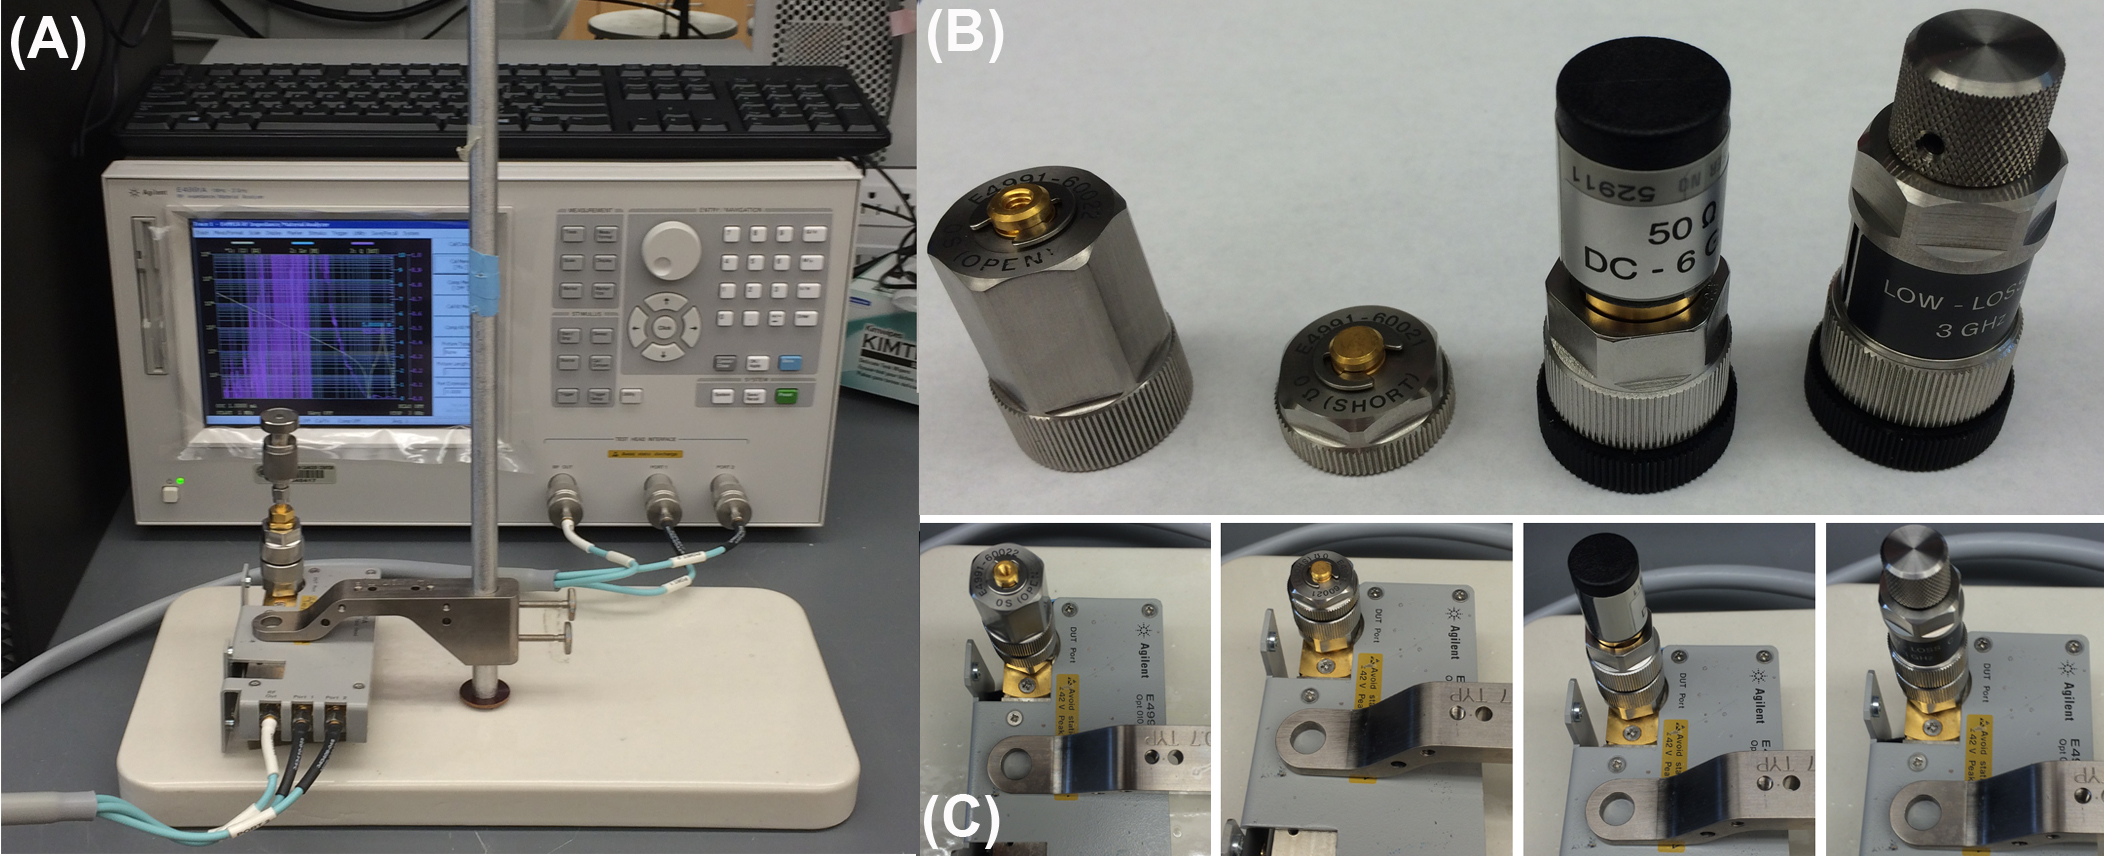 Impedance analyzer calibration (A) Agilent E4991A impedance analyzer connected to 85070E dielectric probe. (B) Calibrations standards (left-to-right: open circuit, short circuit, 50 ohm load, low-loss capacitor), (C) Attachment of the open circuit, short circuit, 50 ohm load, and low-loss capacitor (left-to-right, respectively).